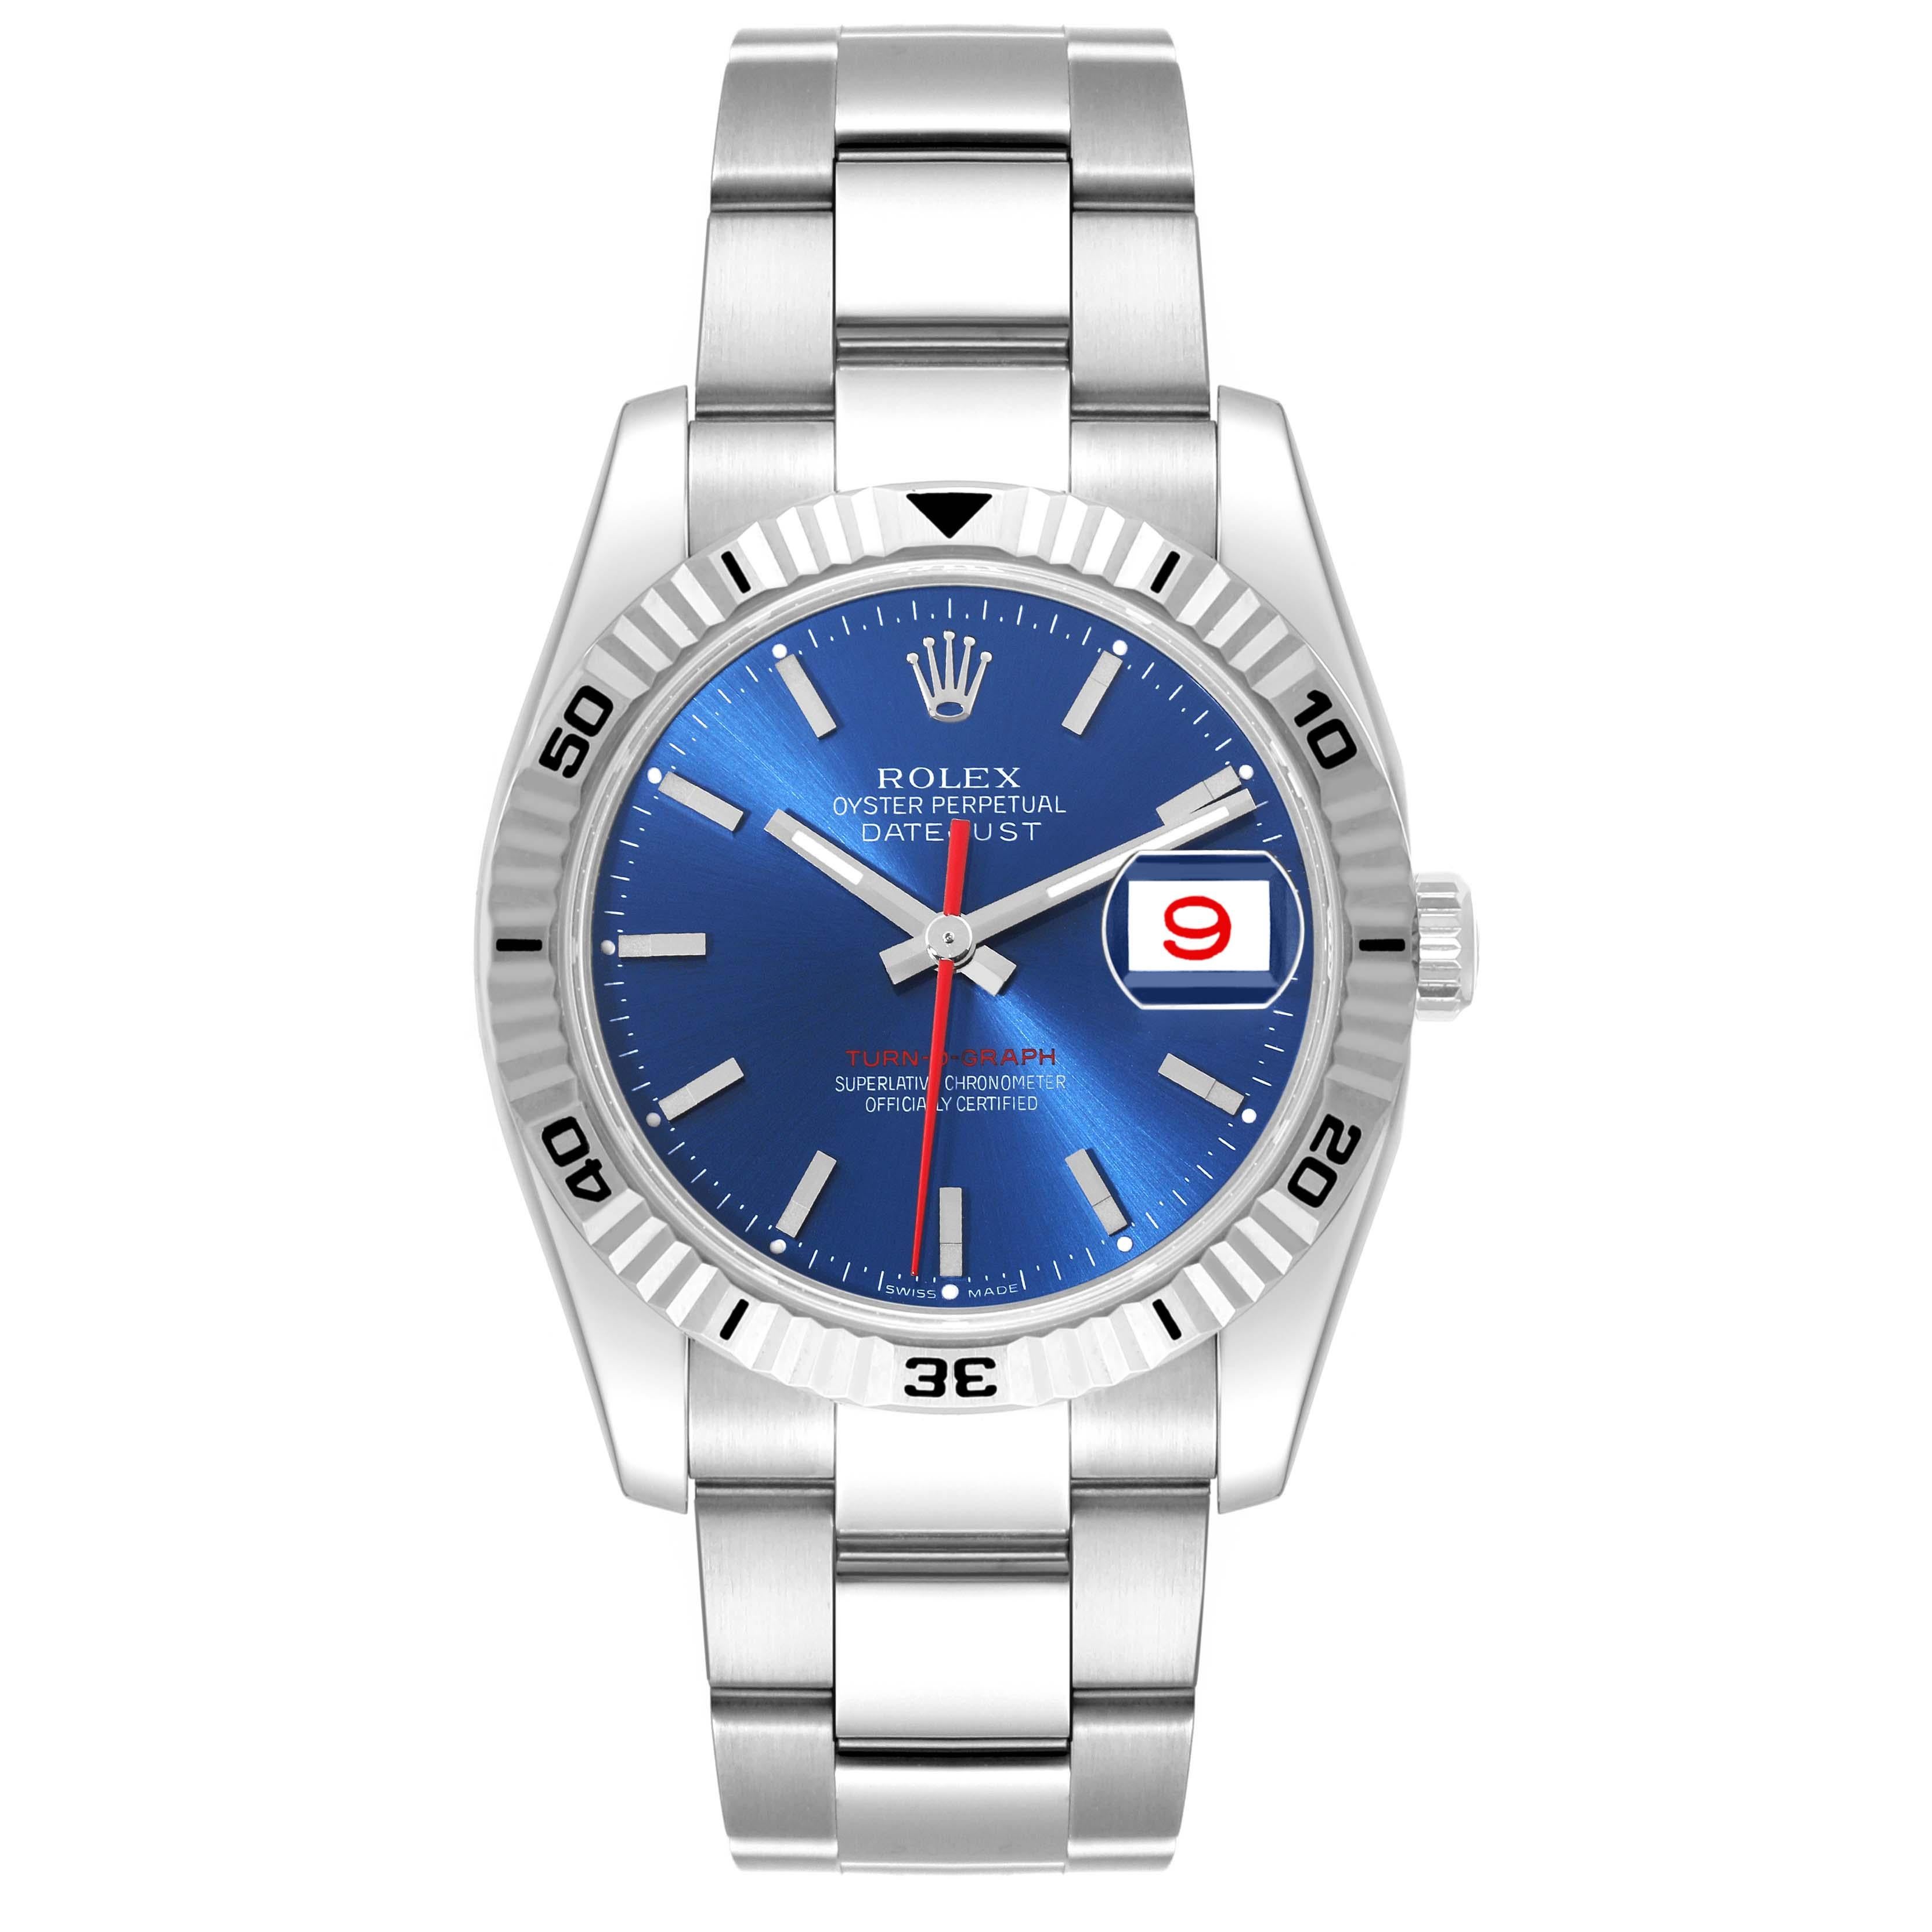 Rolex Datejust Turnograph Steel White Gold Blue Dial Mens Watch 116264 Box Card. Officially certified chronometer automatic self-winding movement. Stainless steel case 36.0 mm in diameter. Rolex logo on the crown. 18k white gold fluted bidirectional